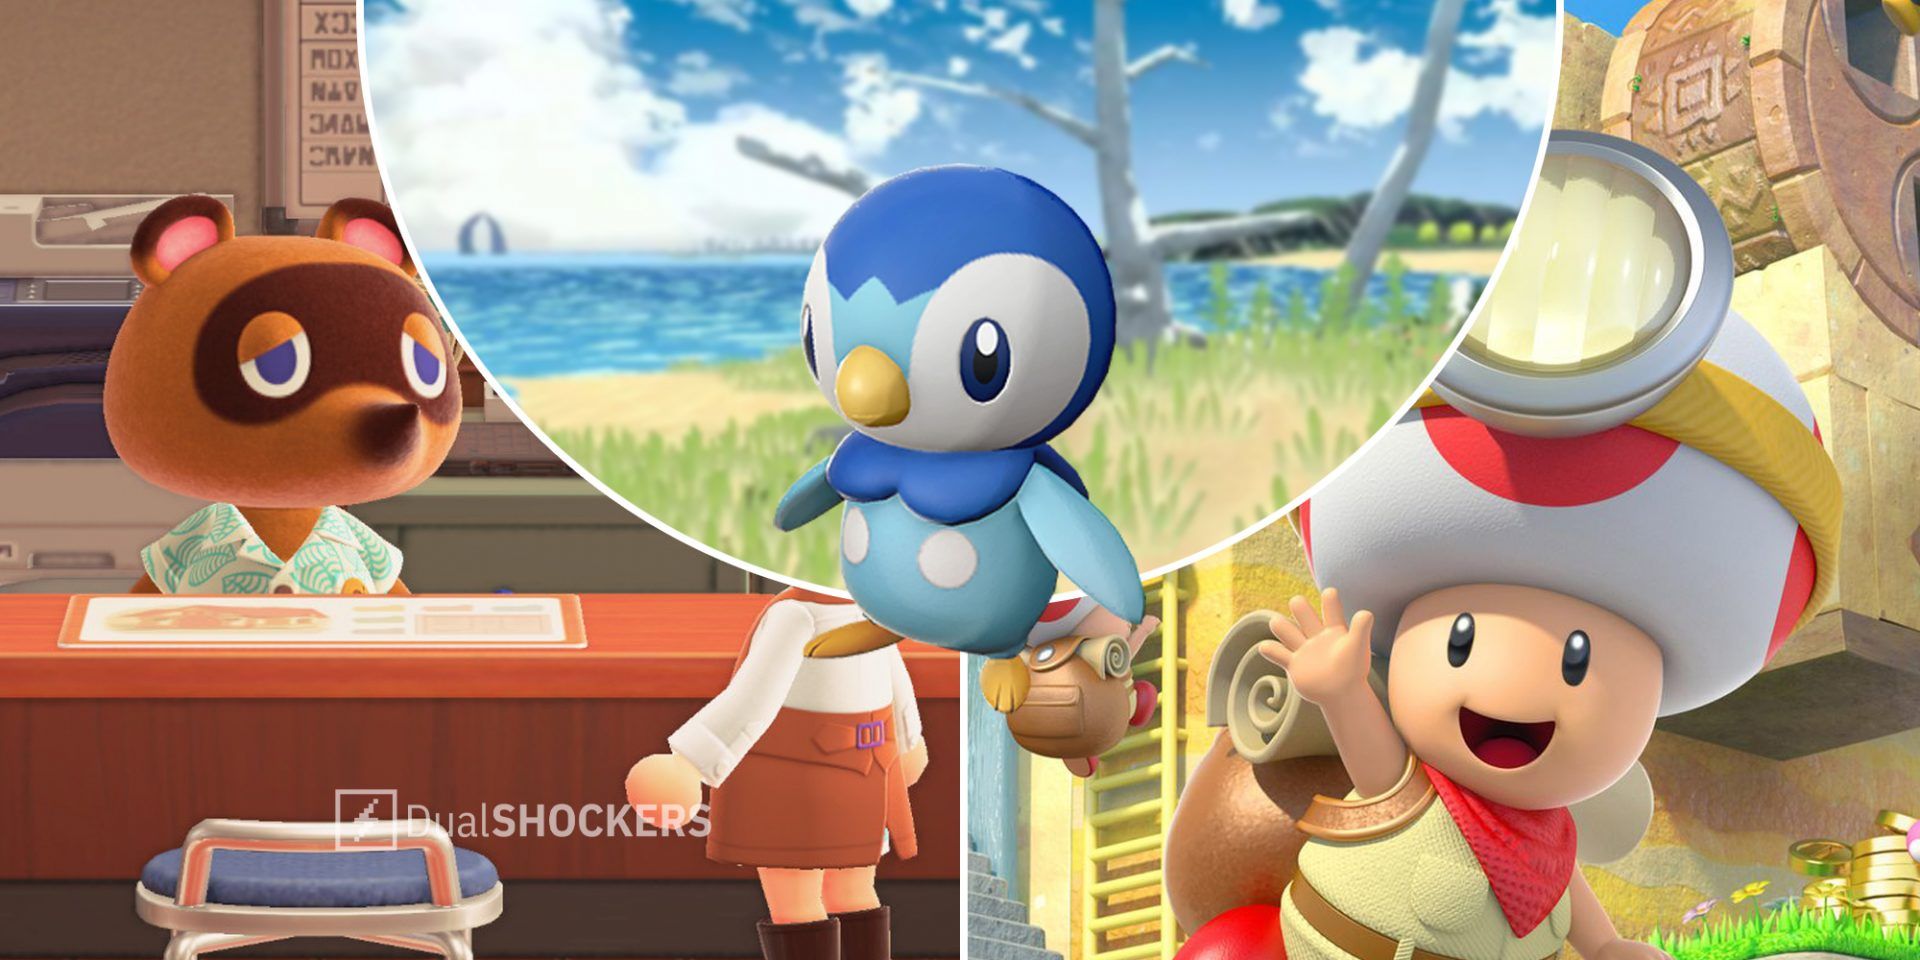 Animal Crossing New Horizons Tom Nook on left, Pokemon Legends Arceus Piplup in middle, Captain Toad Treasure Tracker Toad on right